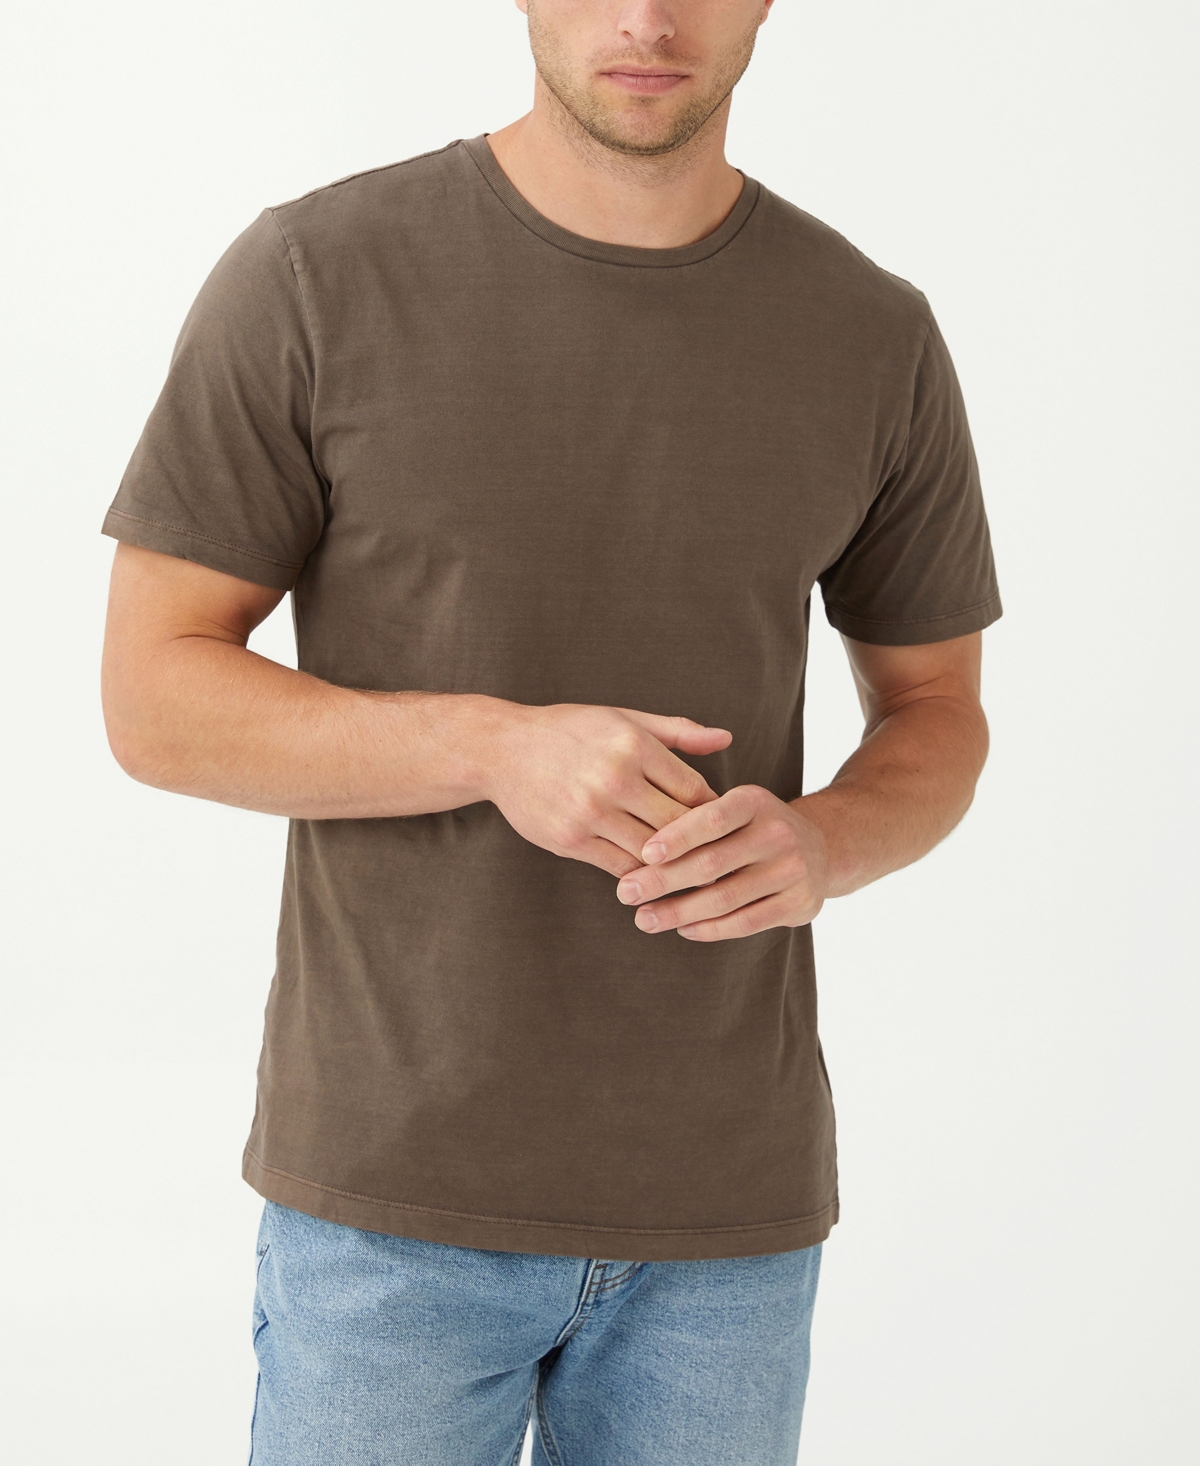 Cotton On Men's Regular Fit Crew T-shirt In Washed Chocolate